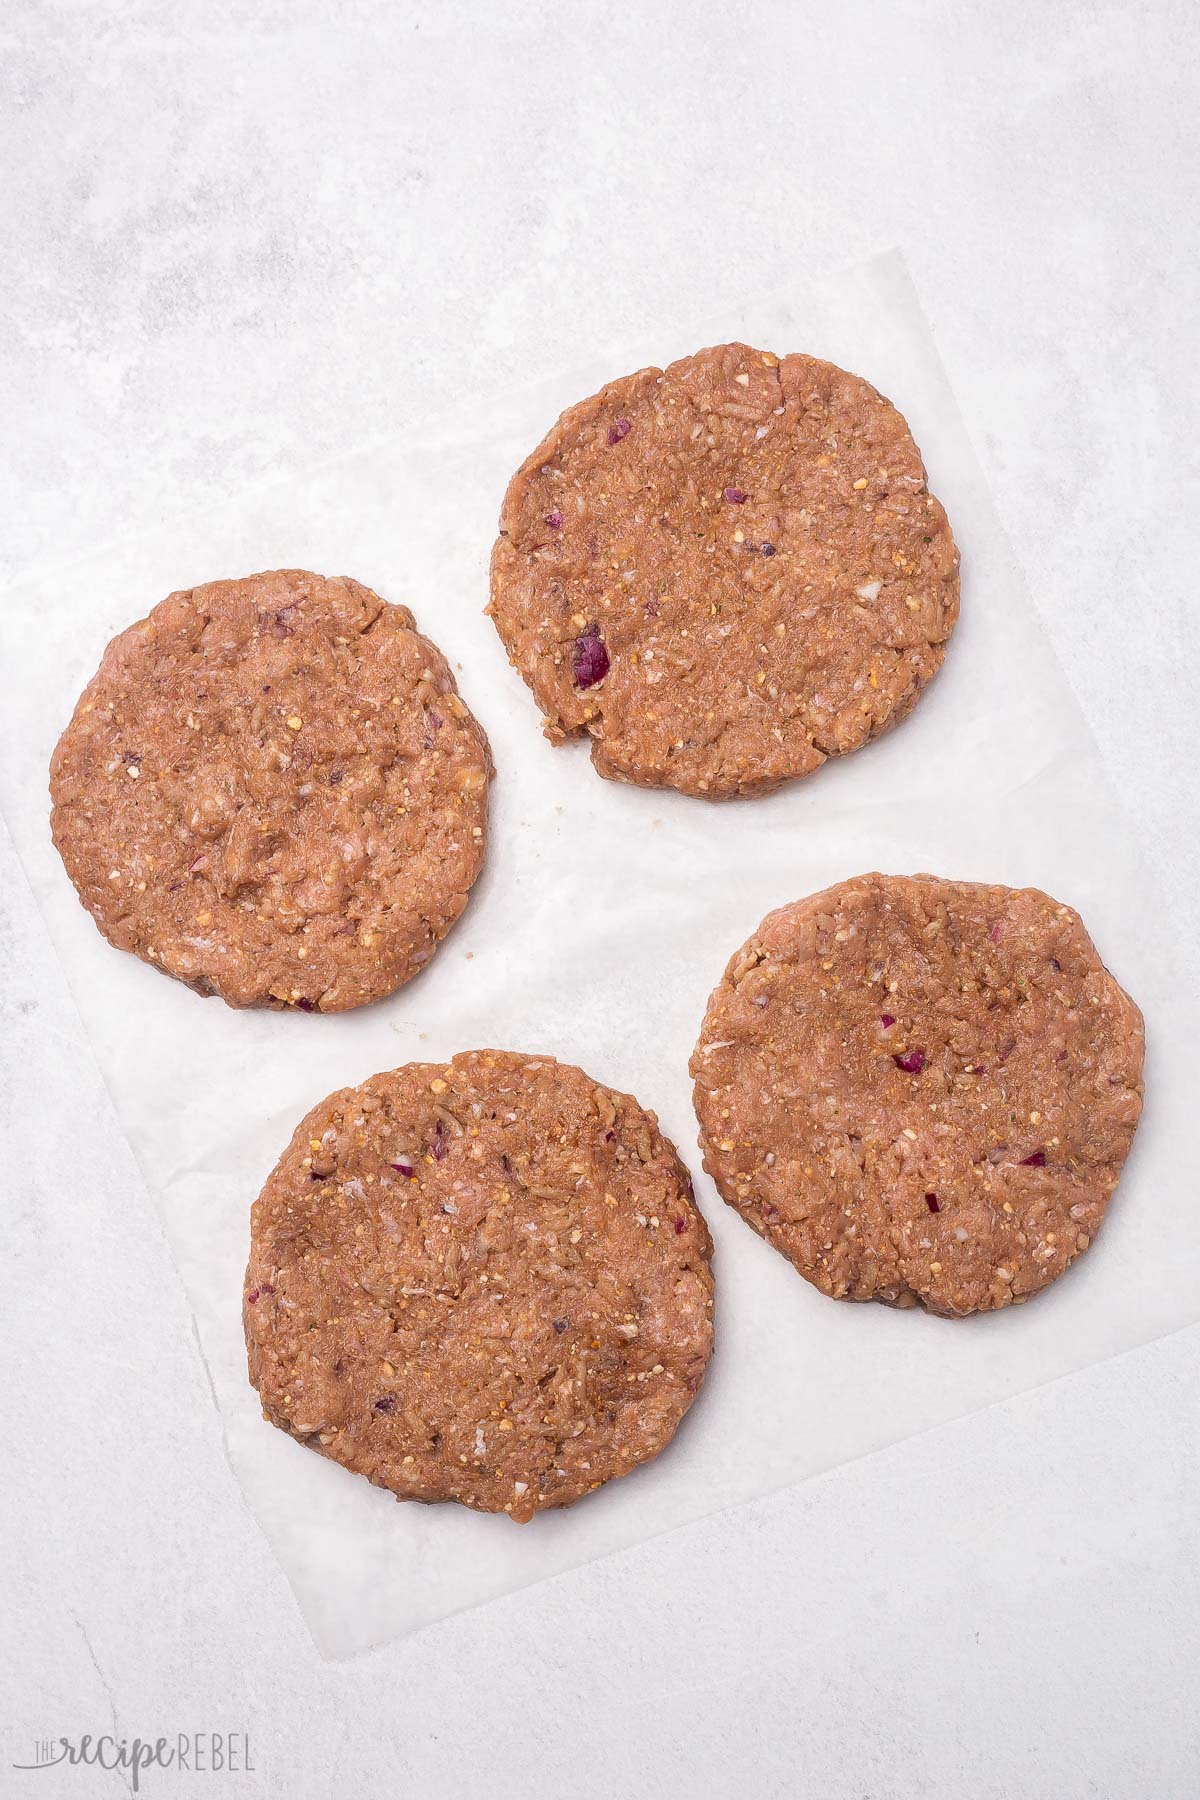 four formed turkey burgers, raw and lying on parchment paper.